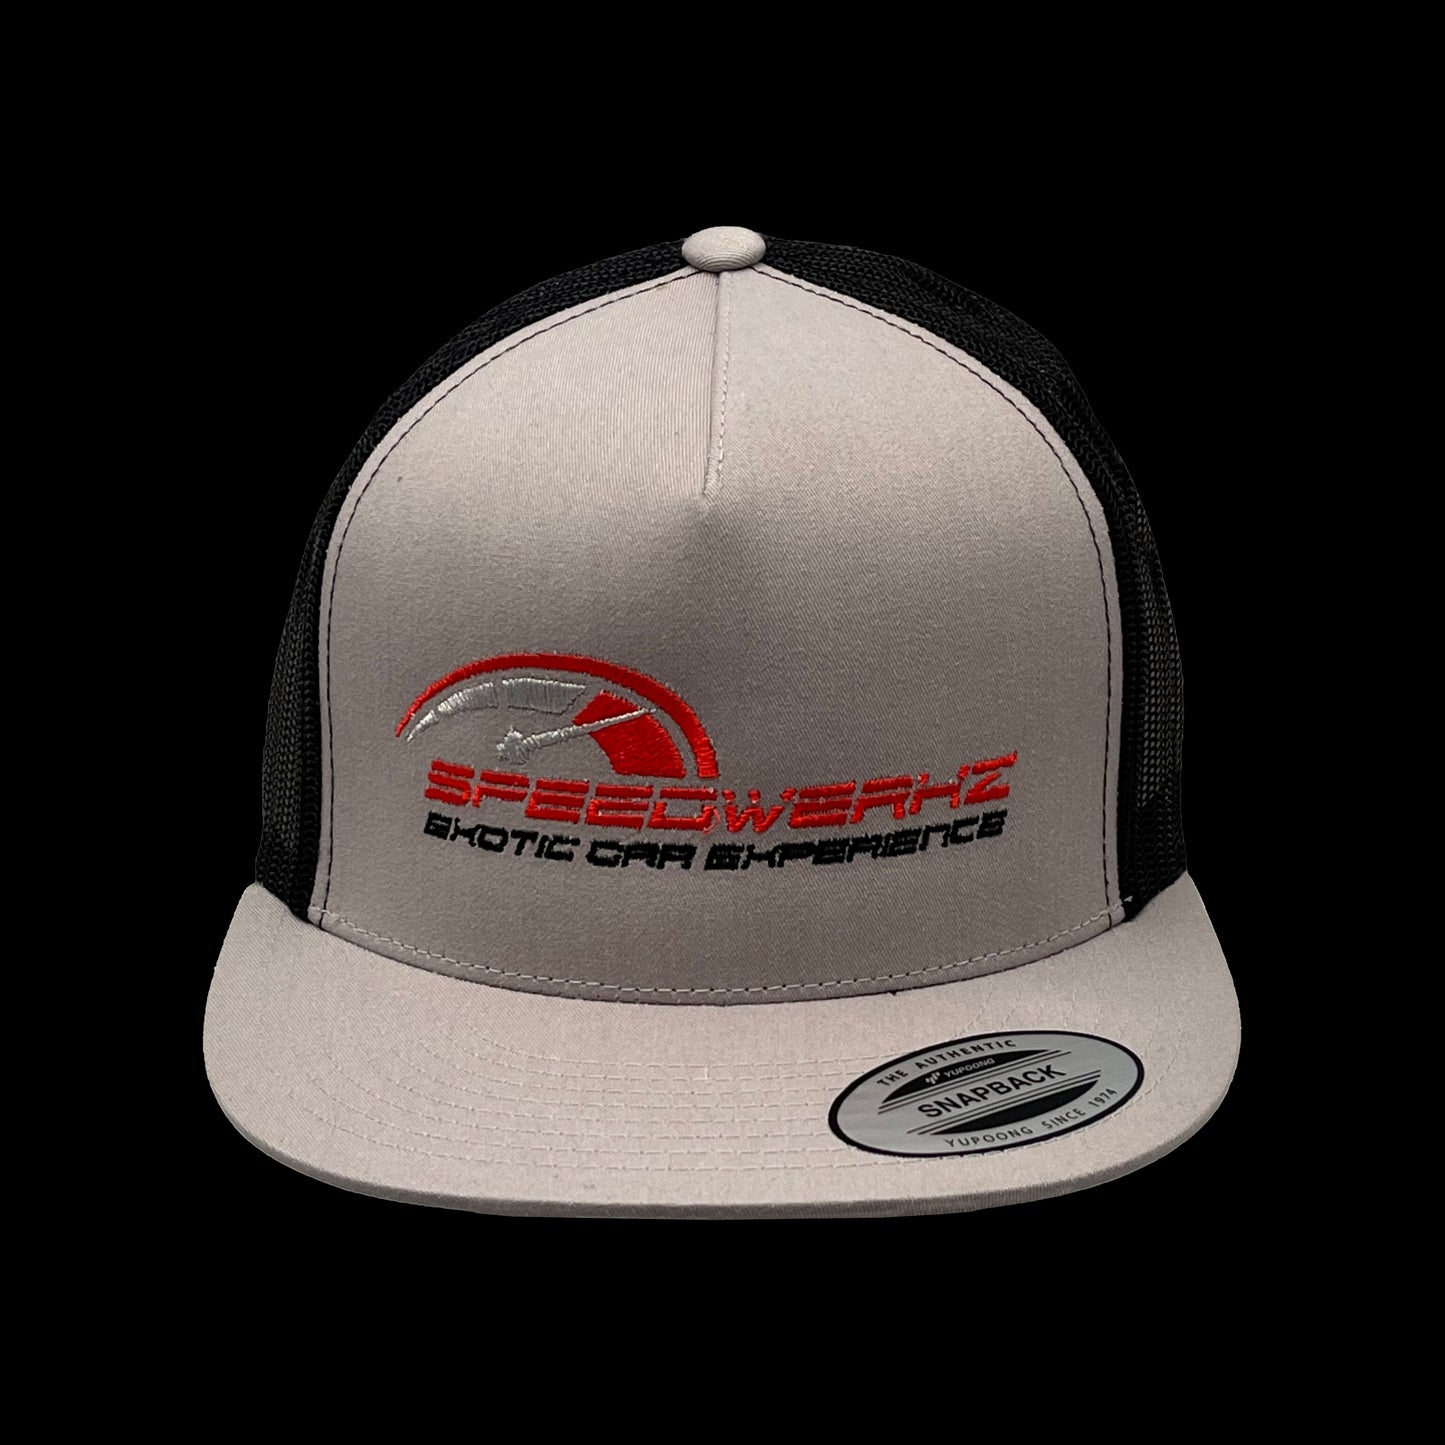 silver and black Speedwerkz hat with a red and white logo